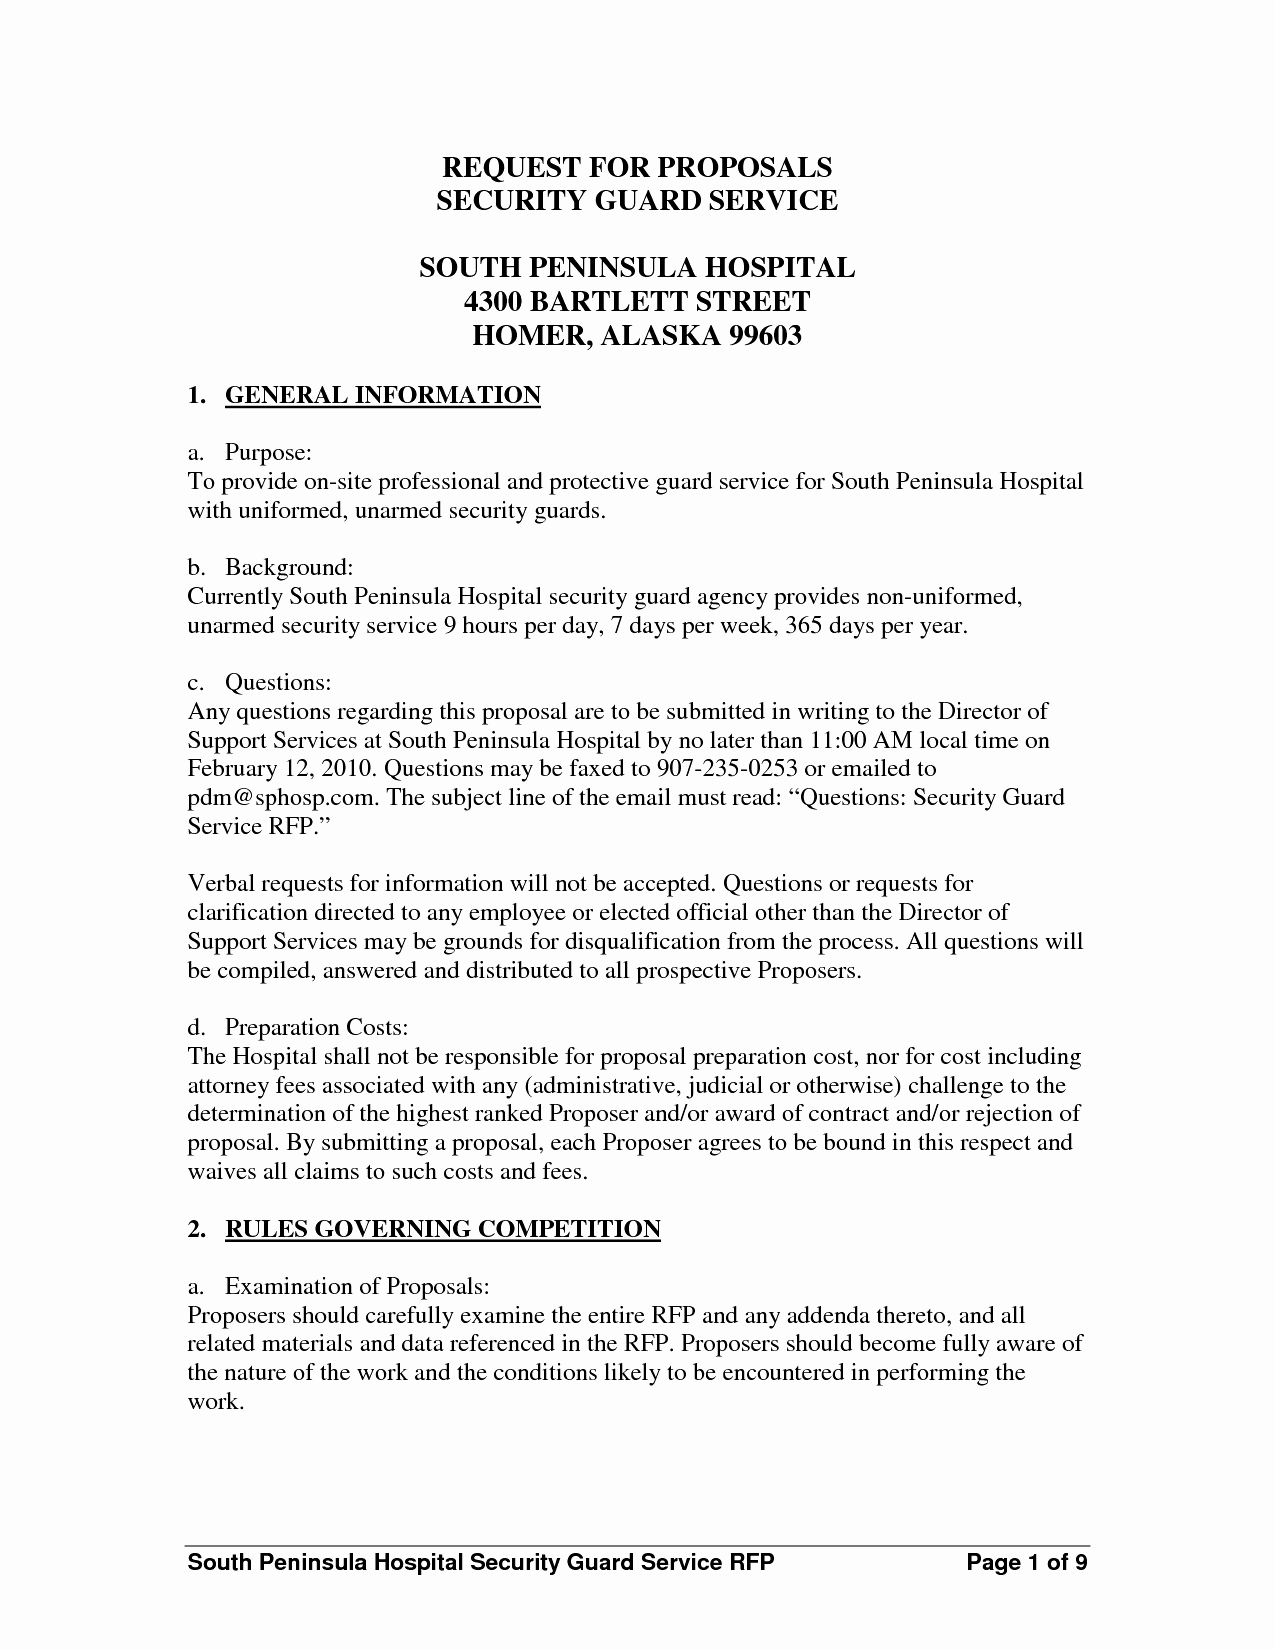 Business Proposal Cover Letter Mughals